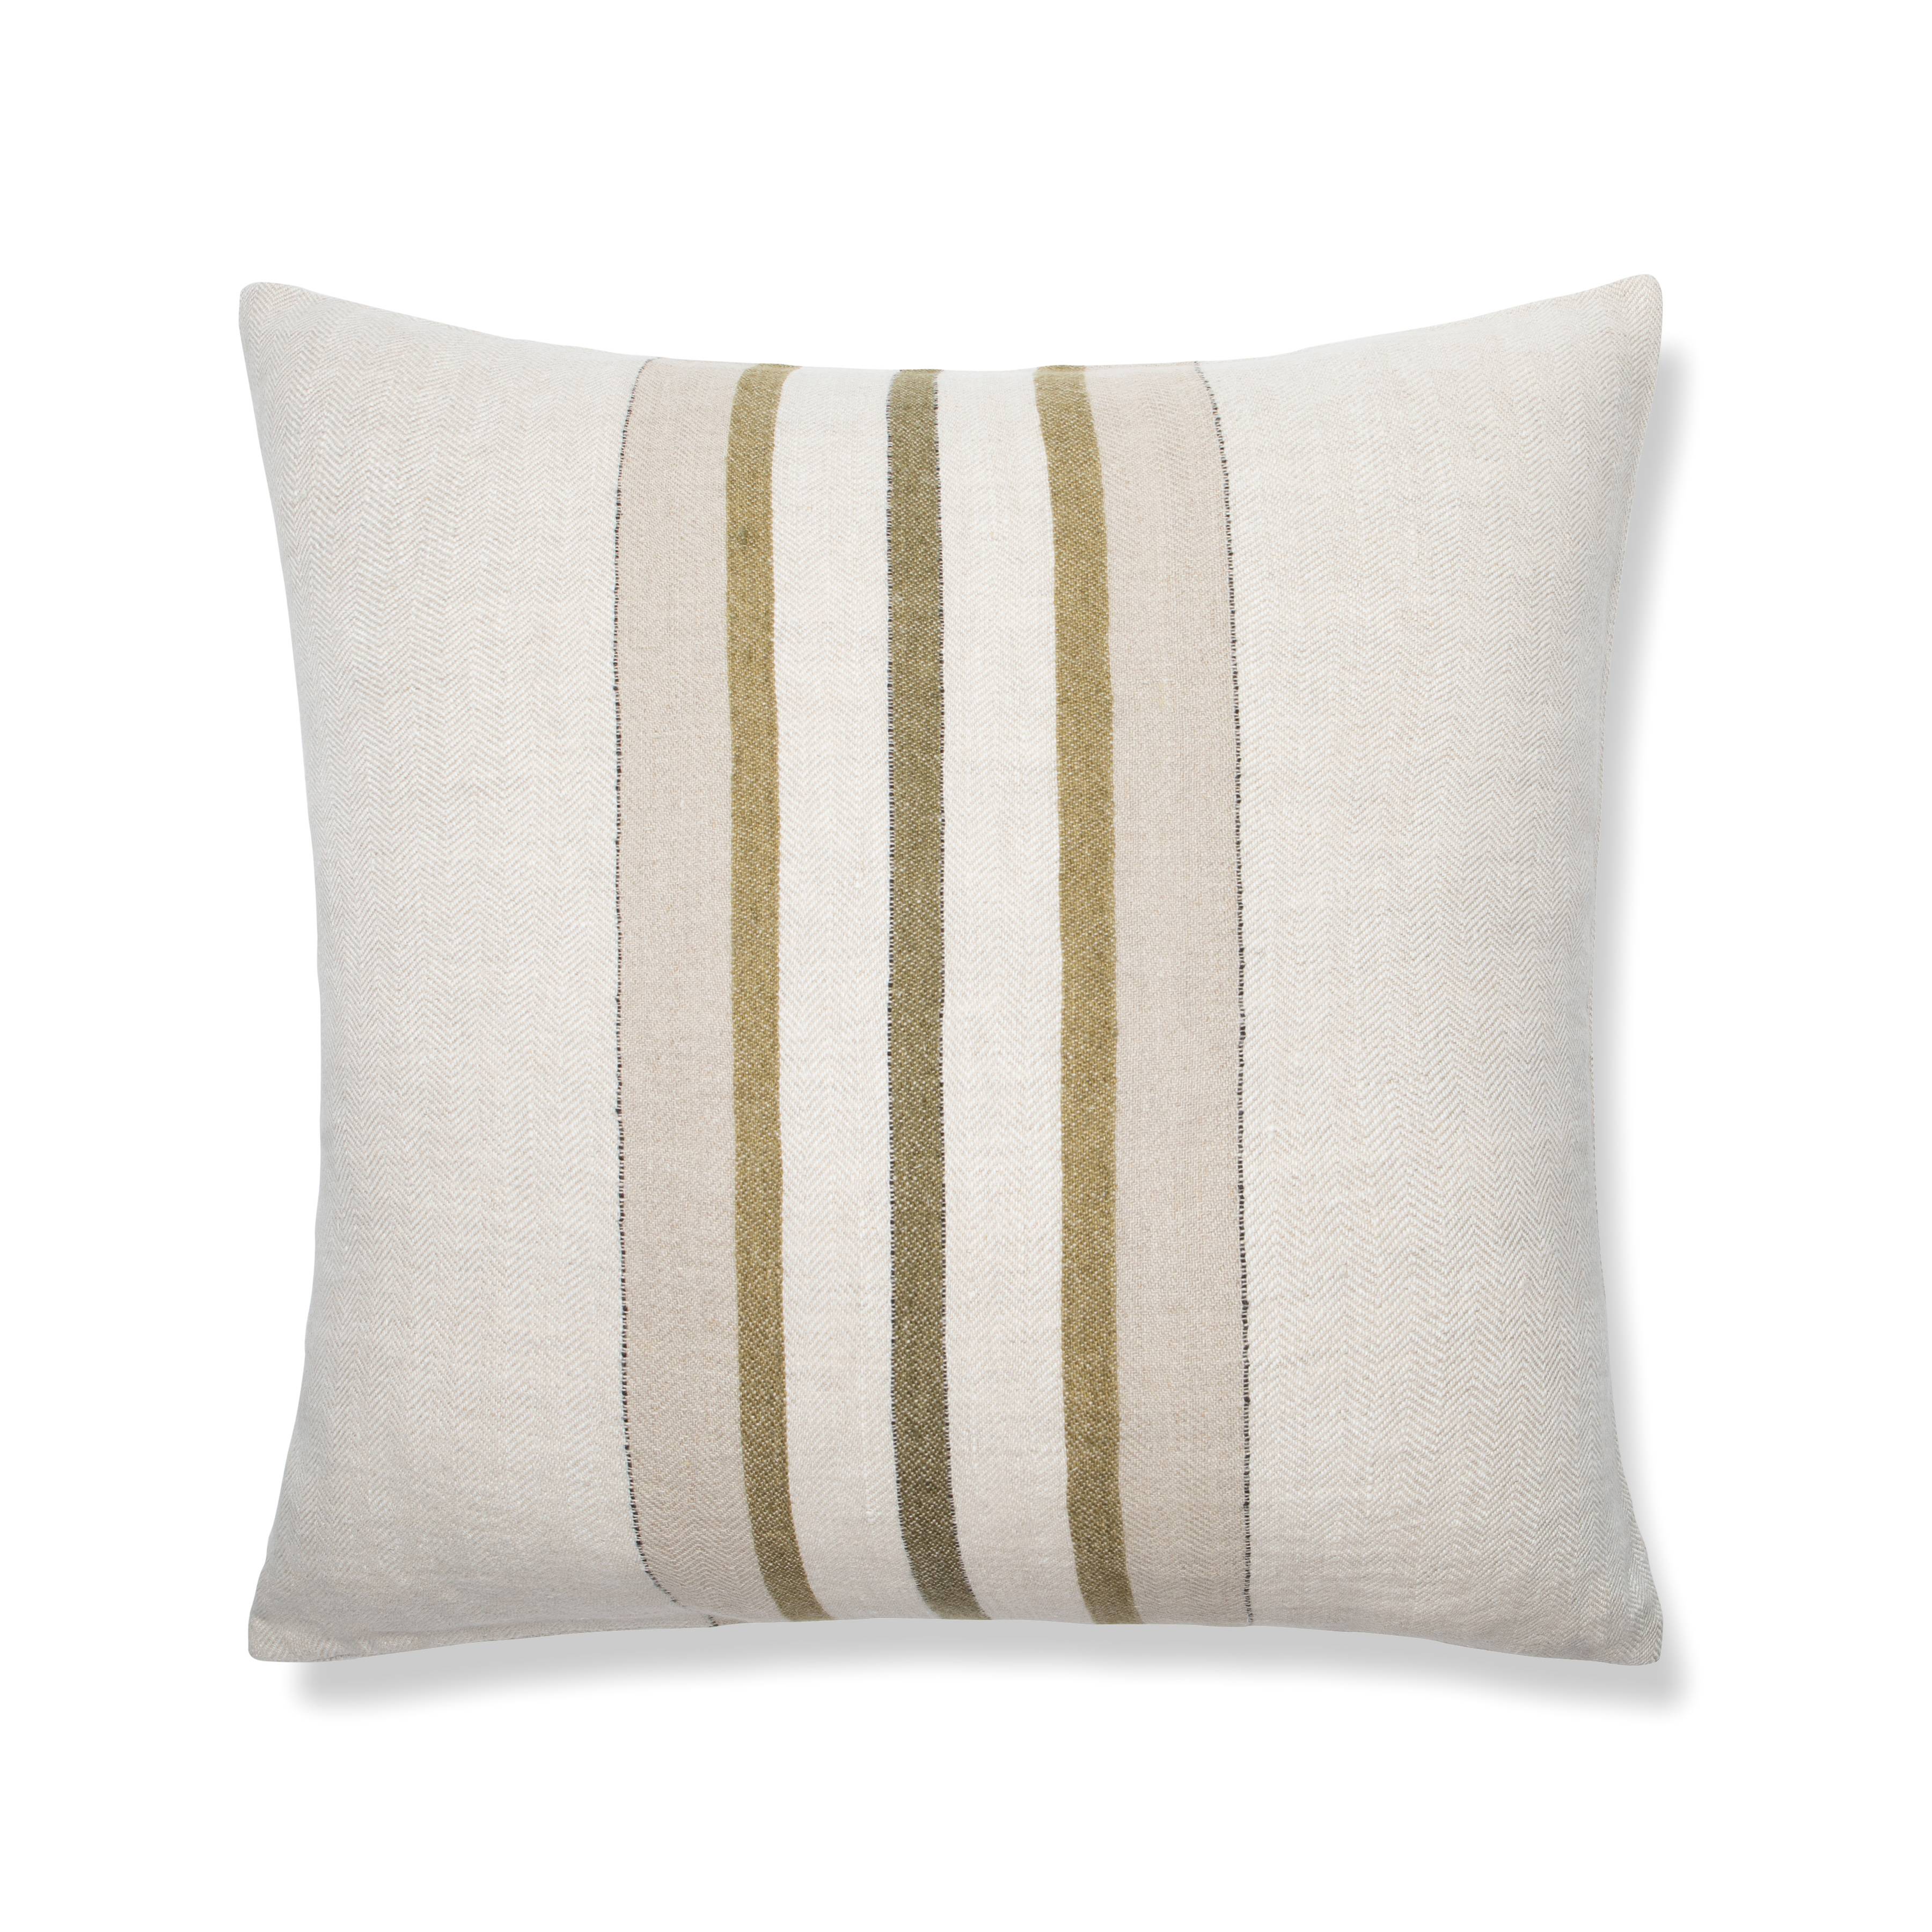 Bruges Cushion Pillow Cover - 22x22